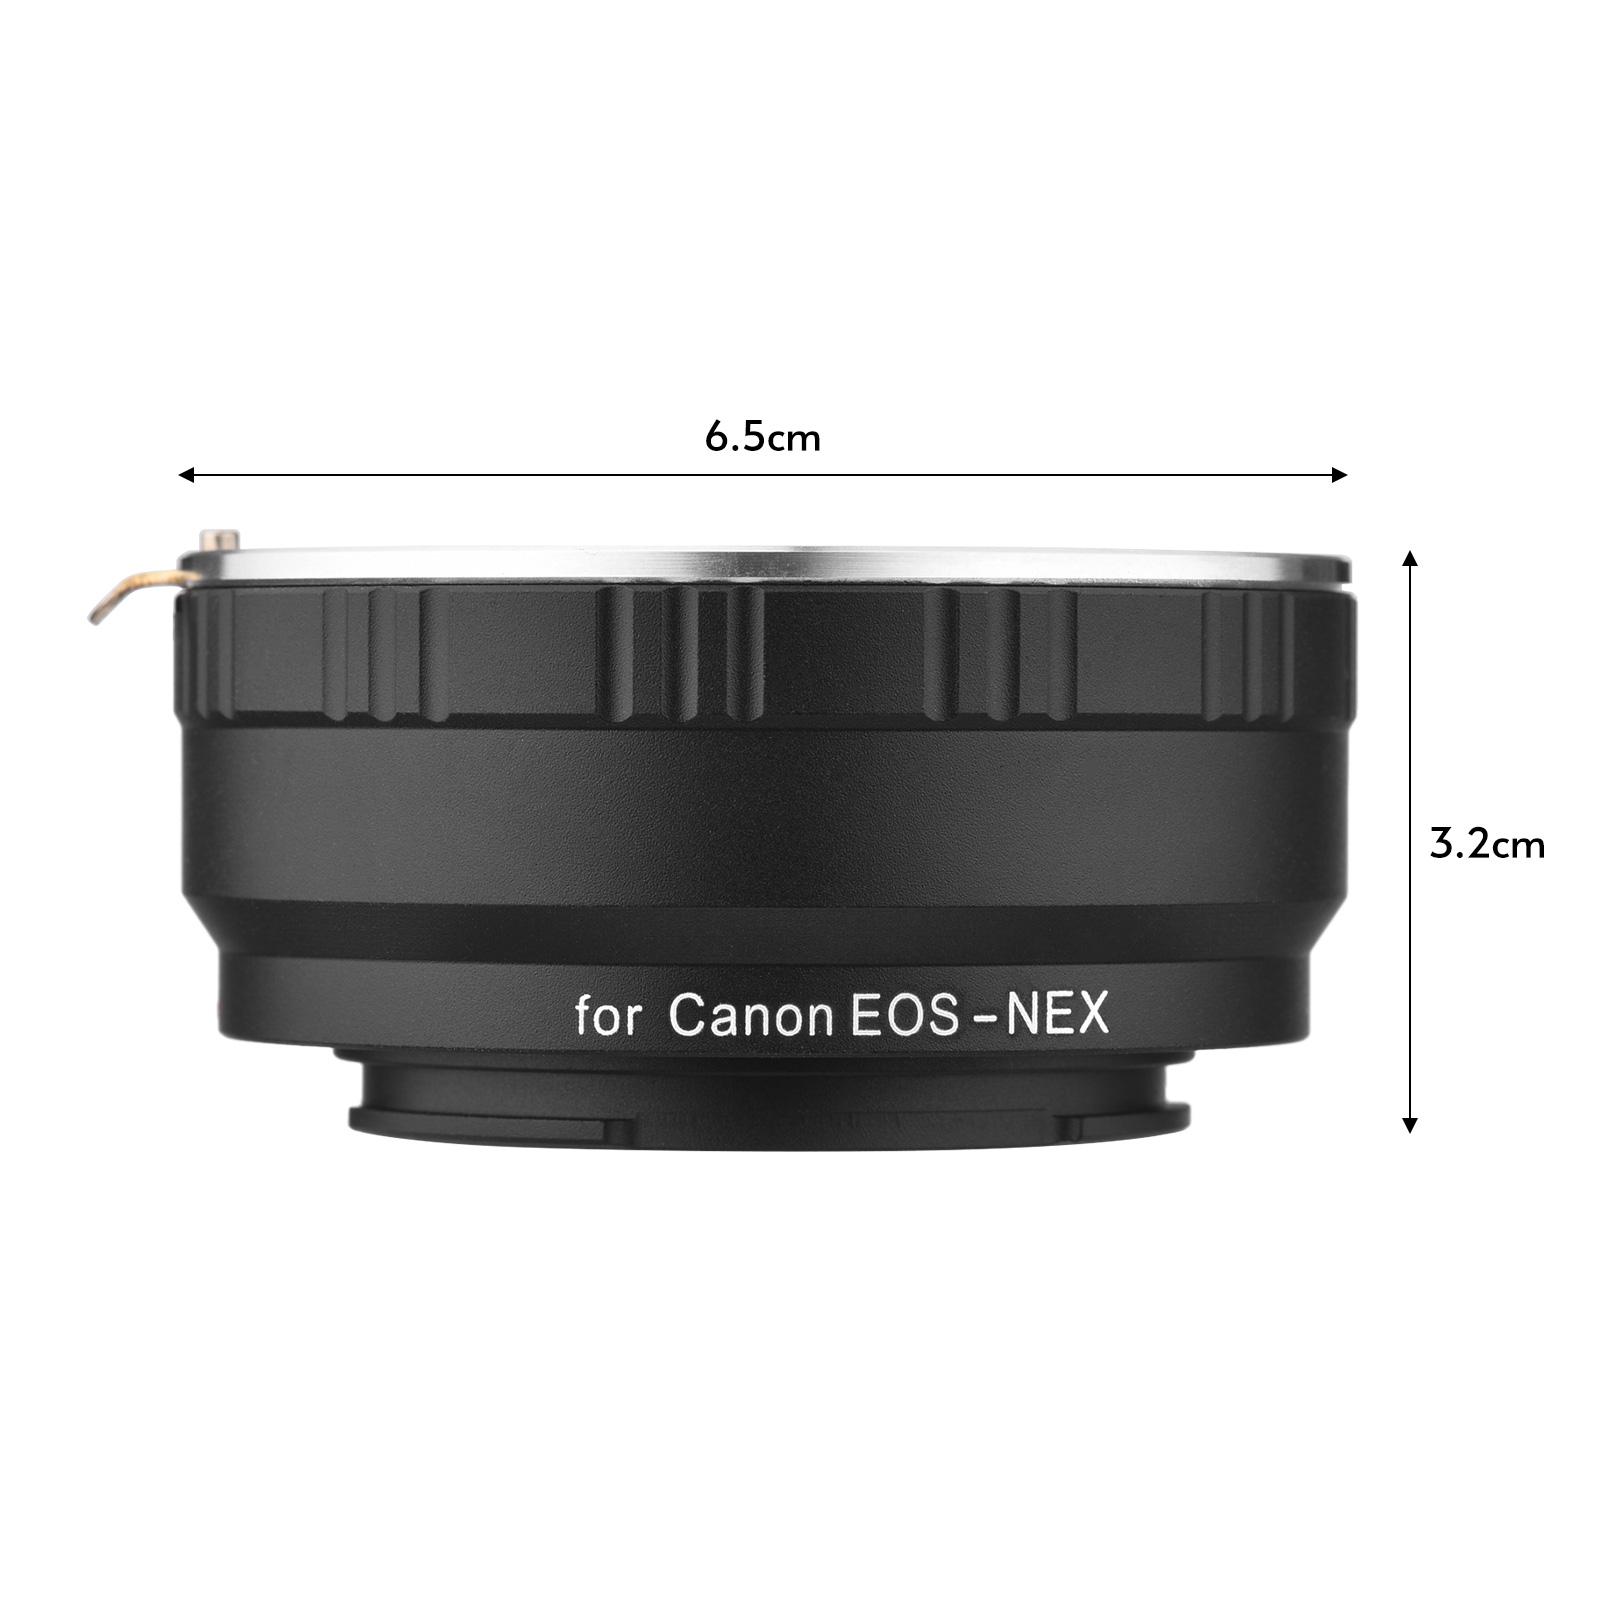 Andoer EOSNEX Camera Lens Adapter Ring with Infinity Focus Replacement for Canon EOS Lens to Sony